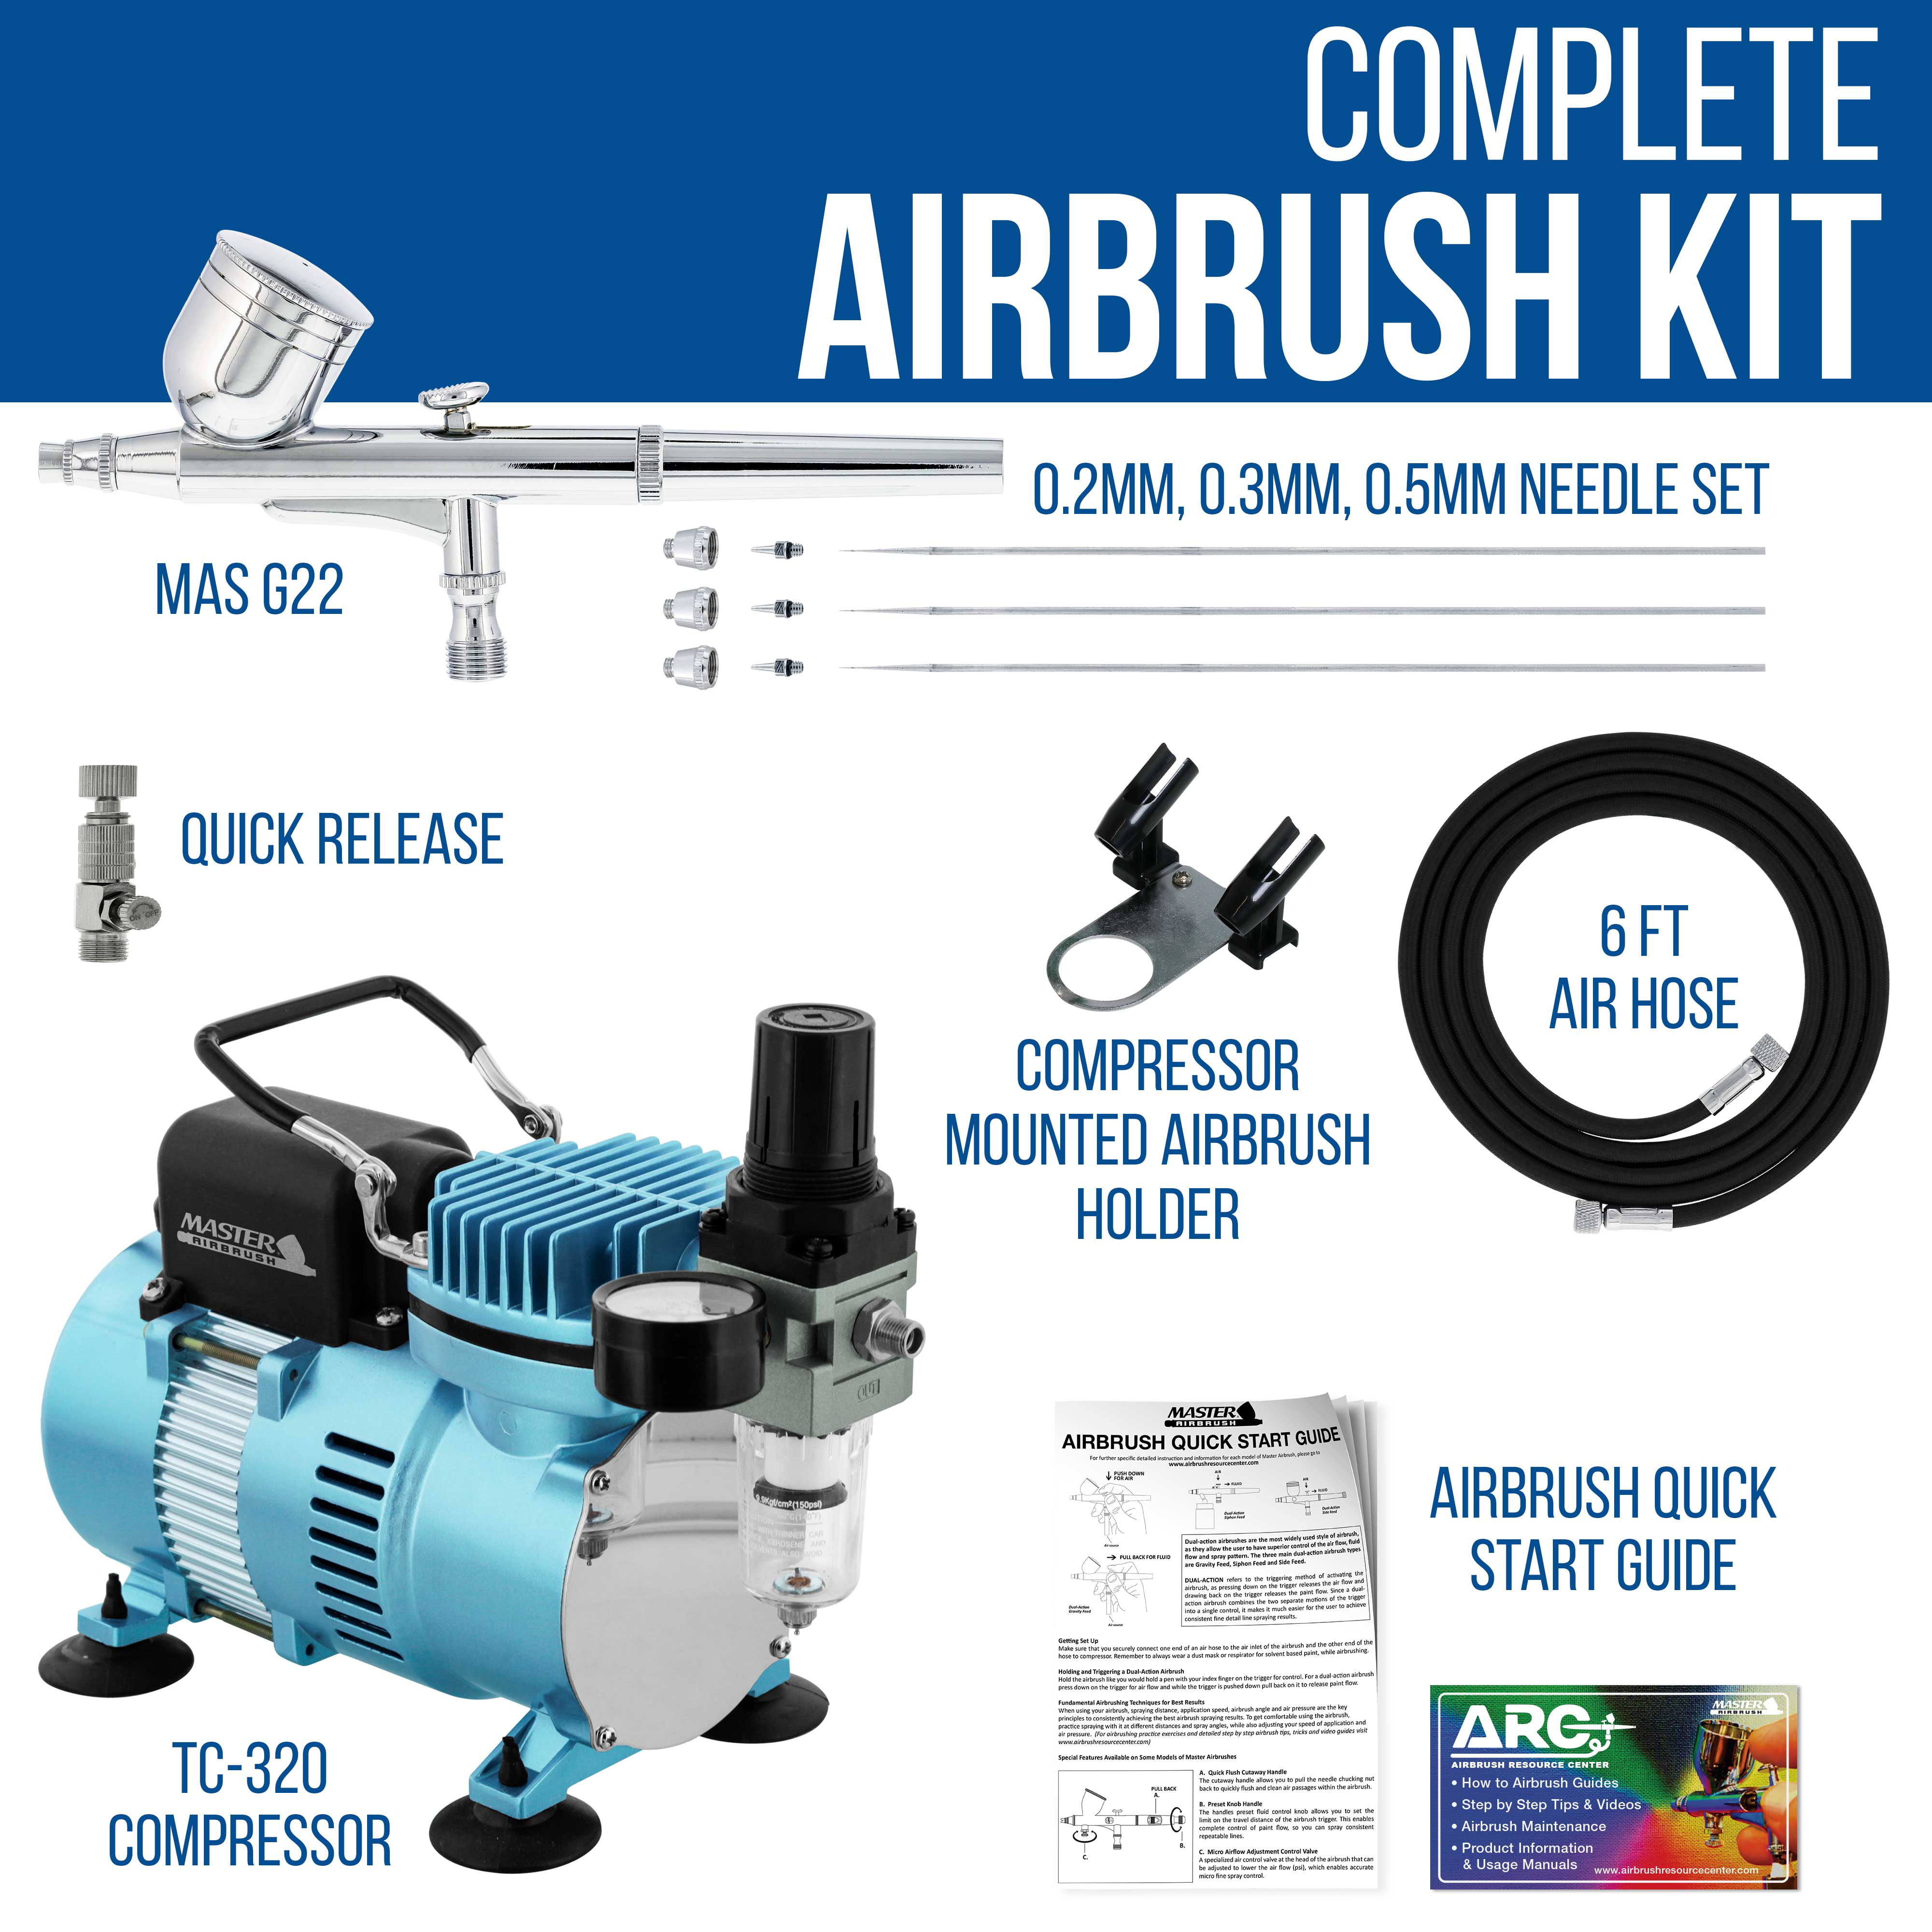 Master Airbrush Cool Runner II Dual Fan Air Compressor Airbrushing System Kit with 3 Professional Airbrush Sets, 0.2, 0.3 mm Gravity & 0.8 mm Siphon